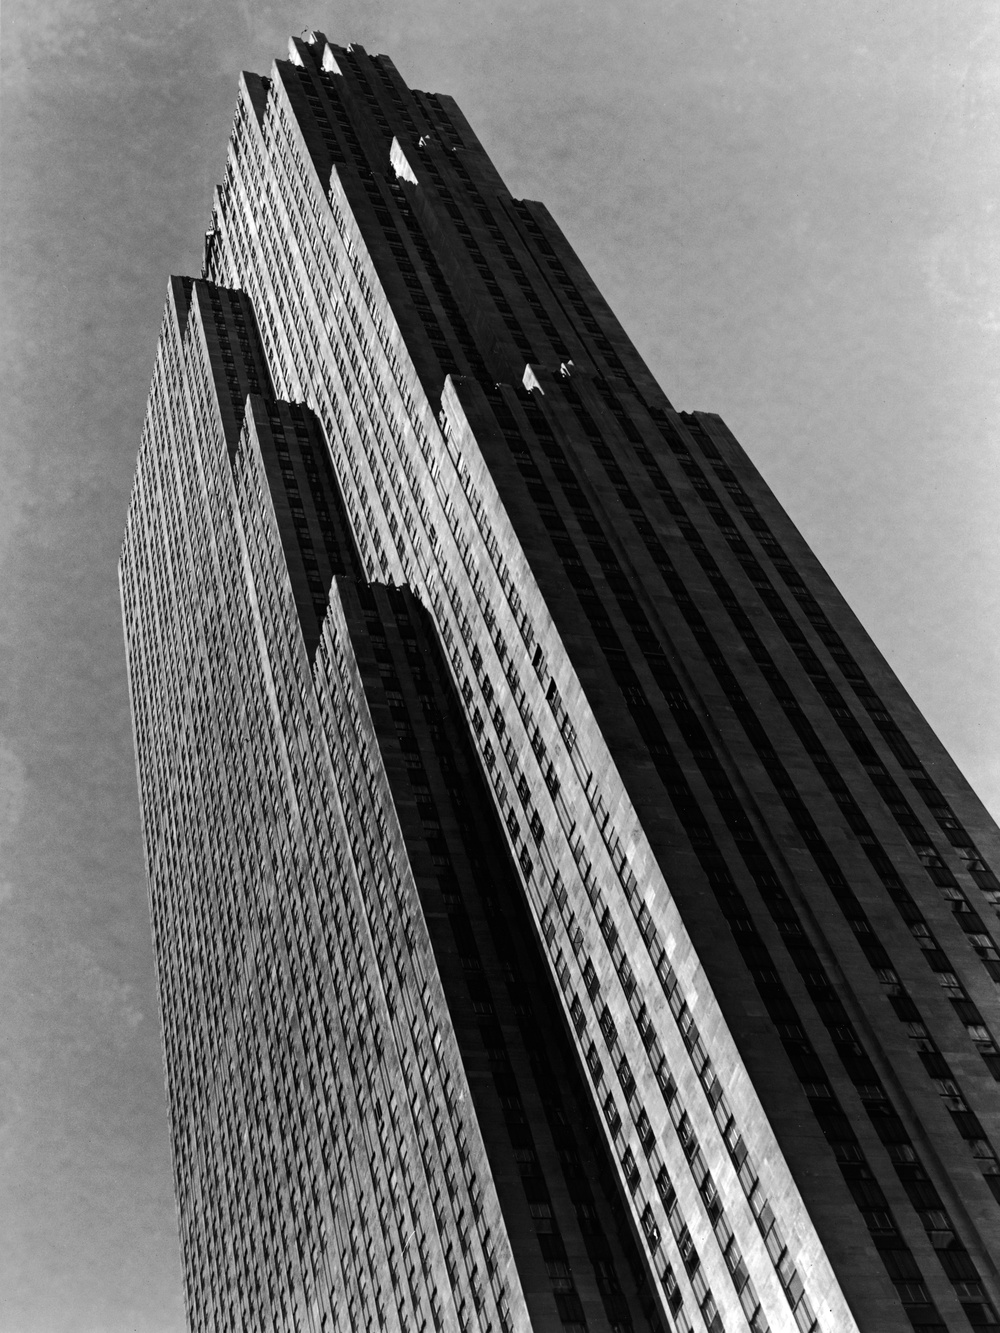 Low angle view of the RCA Building (later the GE Building) at 30 Rockefeller Plaza in the Rockefeller complex, New York, New York, April 1938. (Photo by Hulton Archive/Getty Images)